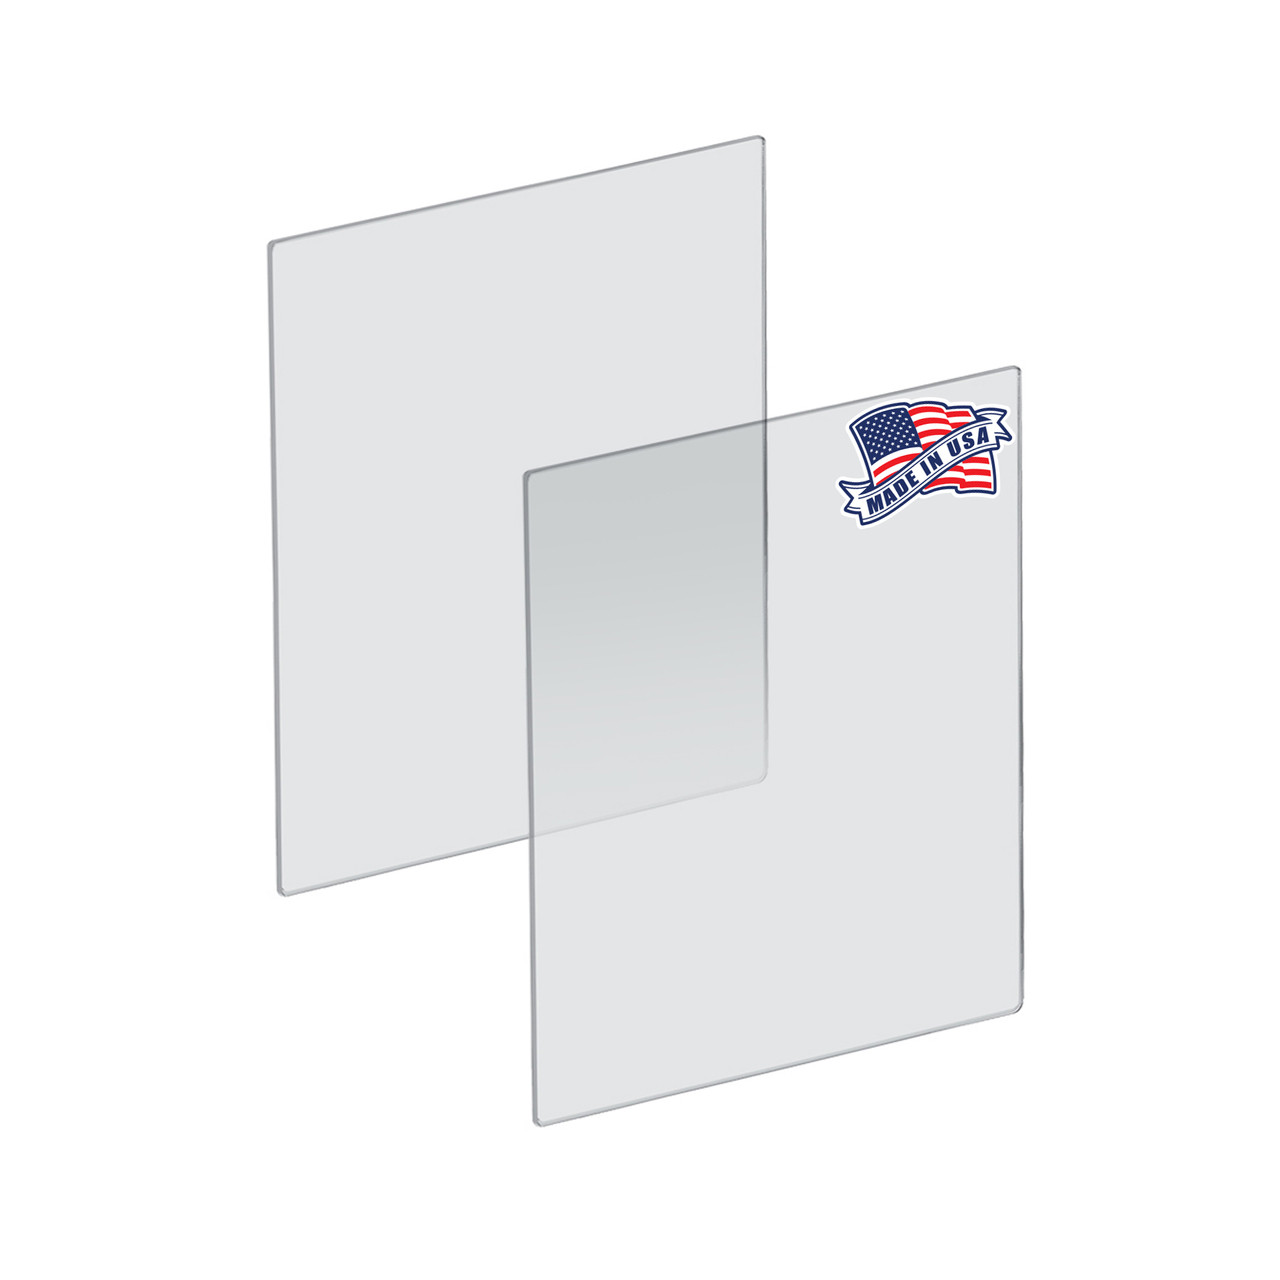 Azar 179624 Plexiglass Acrylic Sheets Cut to size, Clear Plastic Panels, Size: 18 x 24 x 3/16 Thick with Square Corners, 2-Pack